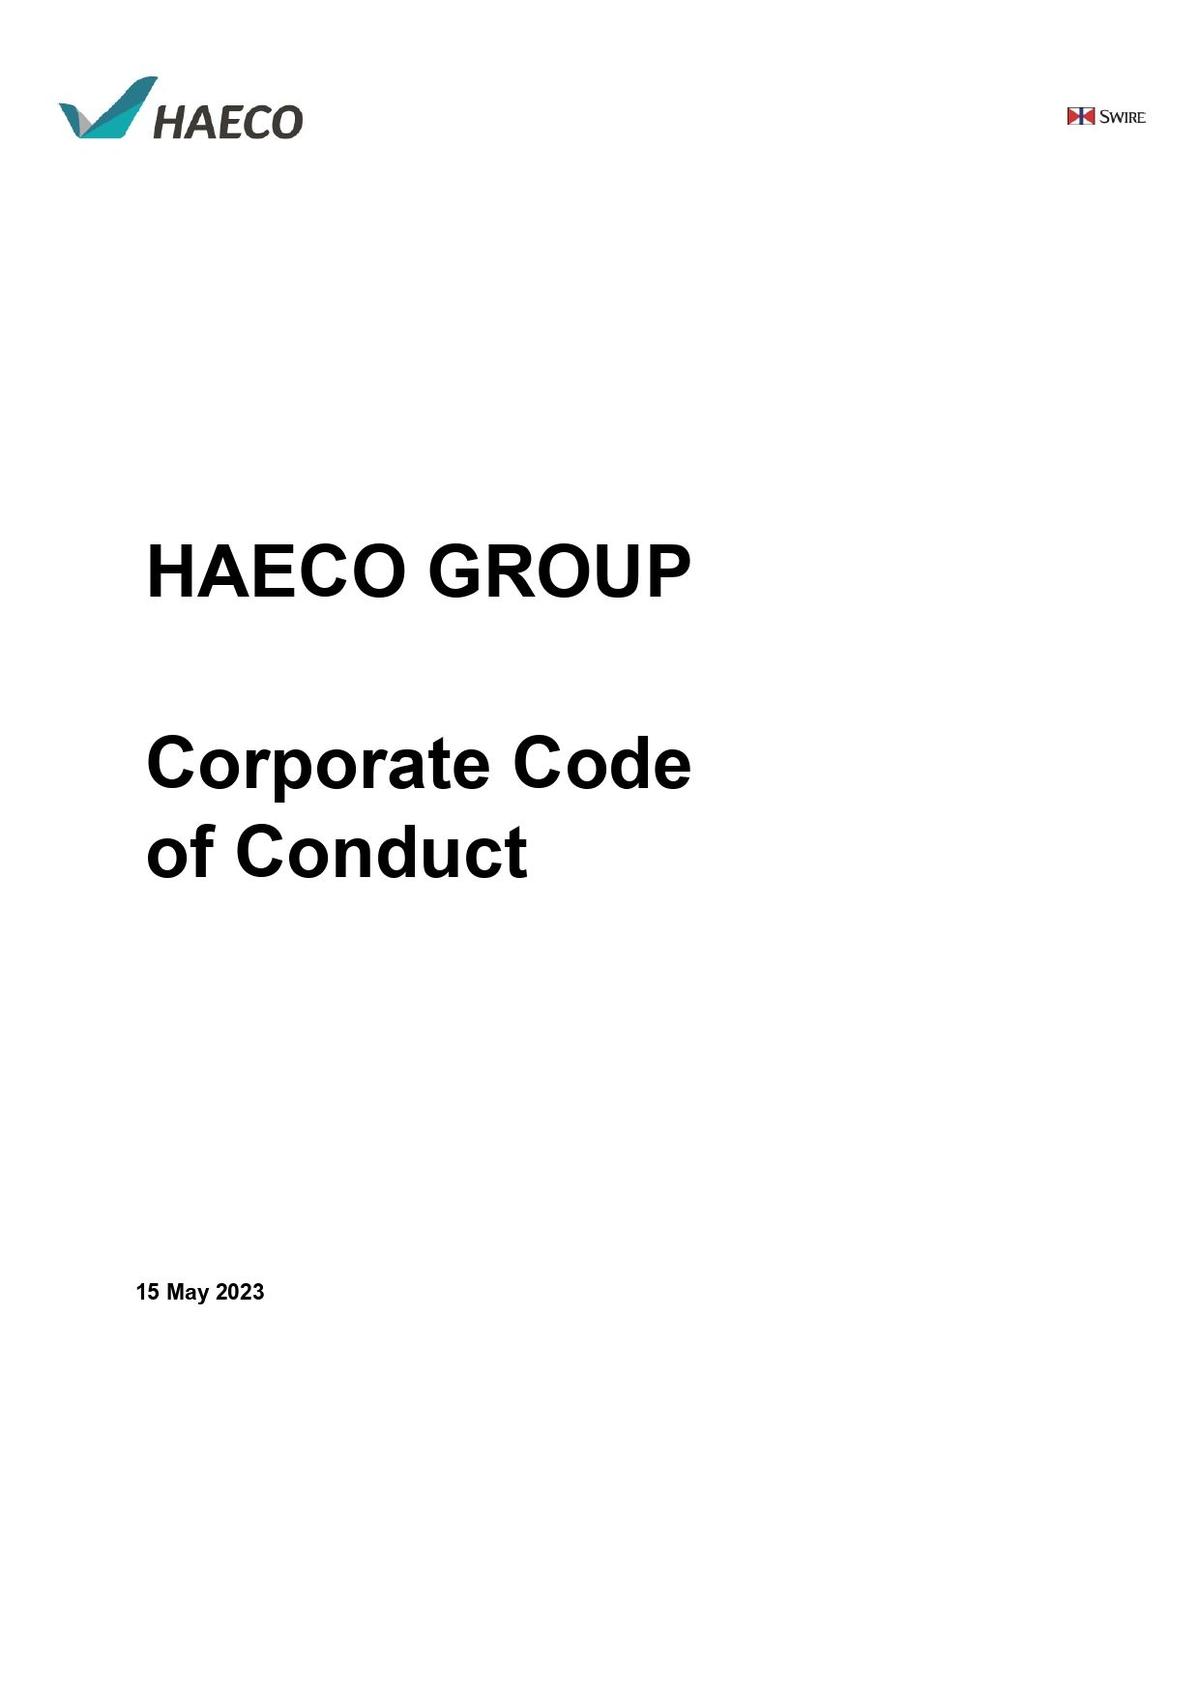 Corporate Code of Conduct